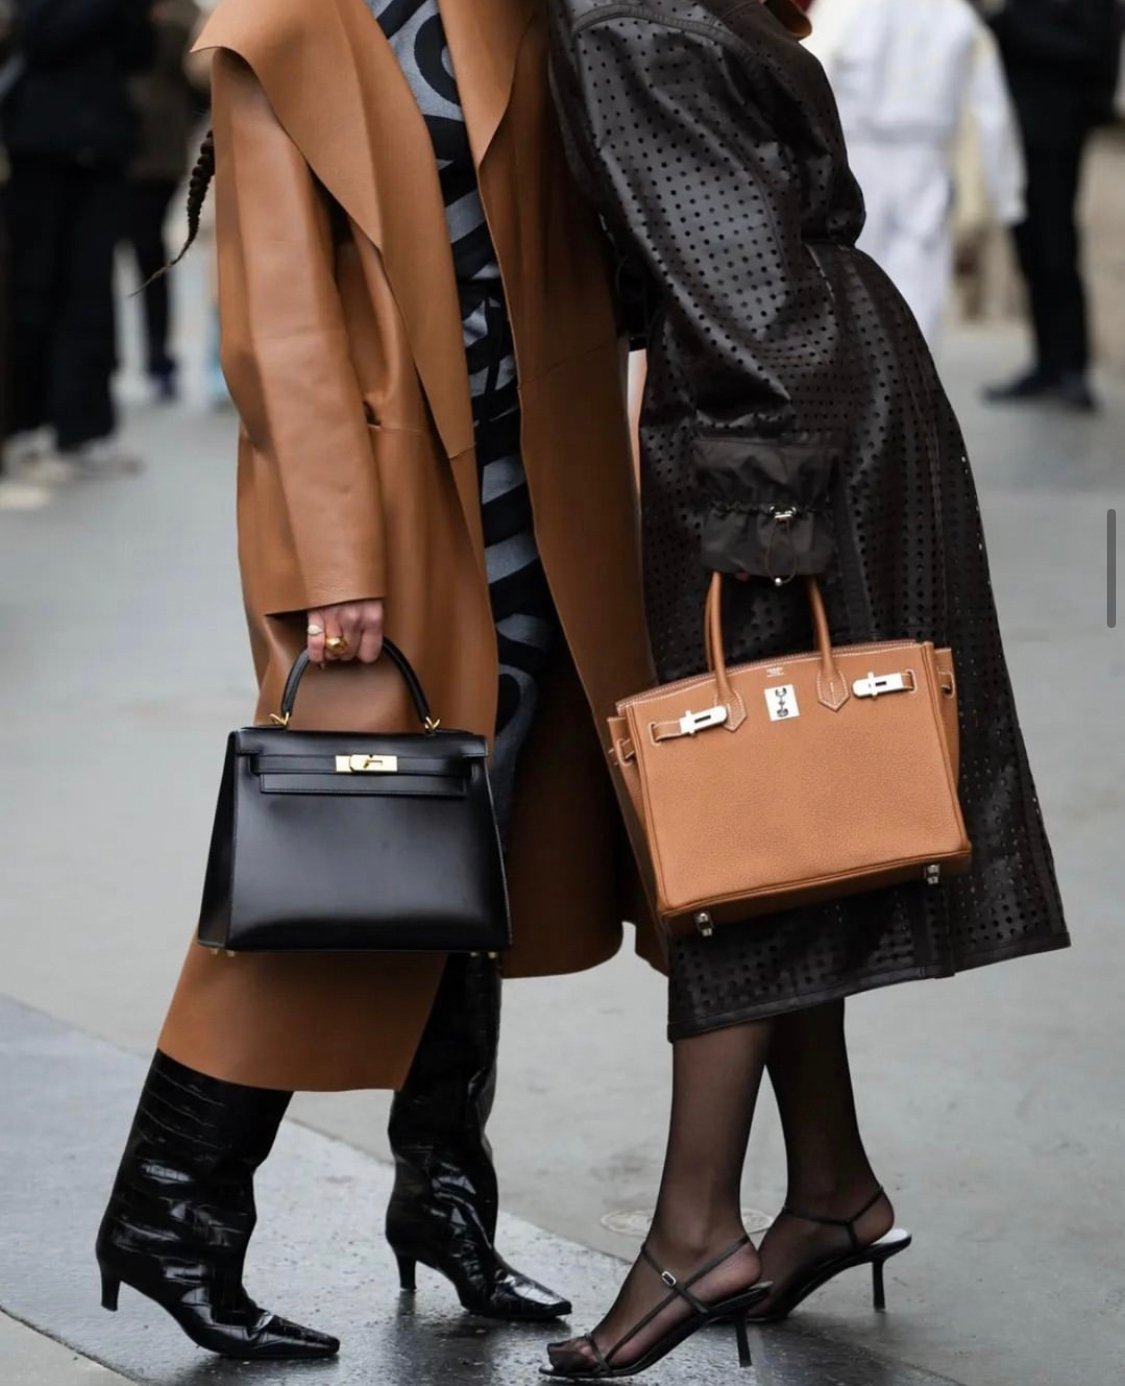 Hermès bags will cost more in 2023, so buy that Birkin now: in